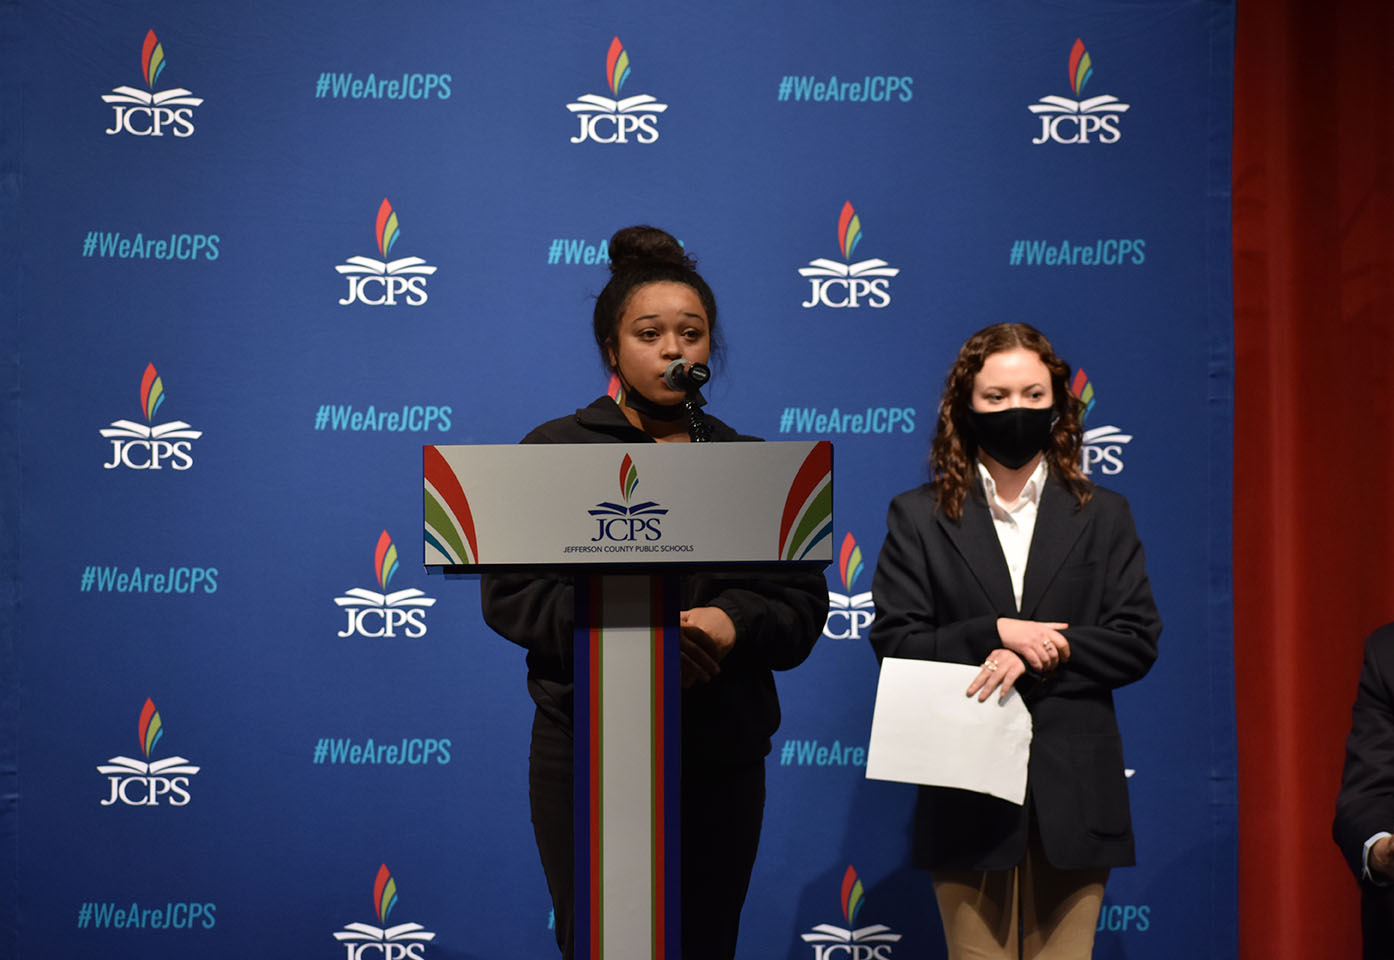 Fairdale High School student Kali Berry and Pleasure Ridge Park High School student Madi Searcy spoke after the announcement of the Everyone Counts initiative. 